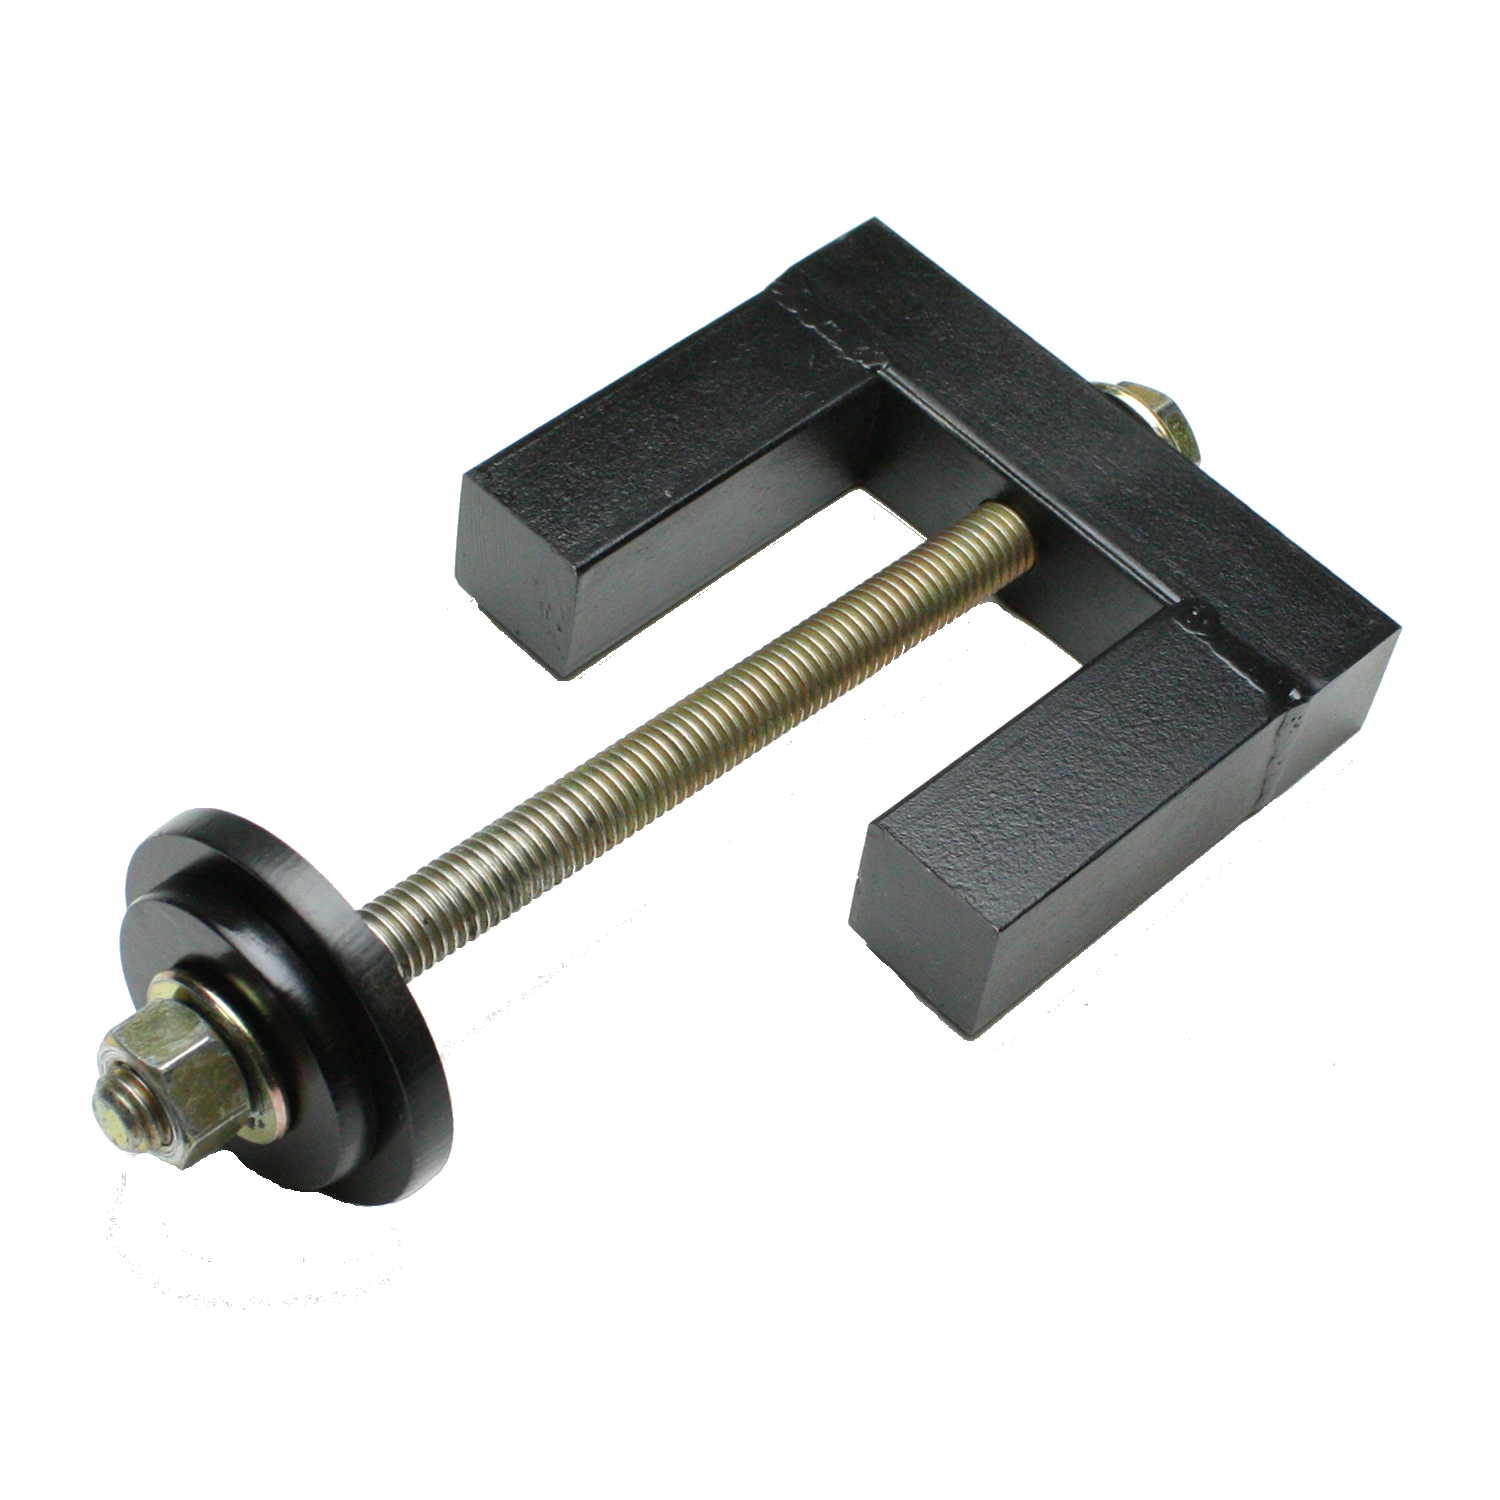 Hotchkis GM Upper Trailing Arm Bushing Install and Removal Tool